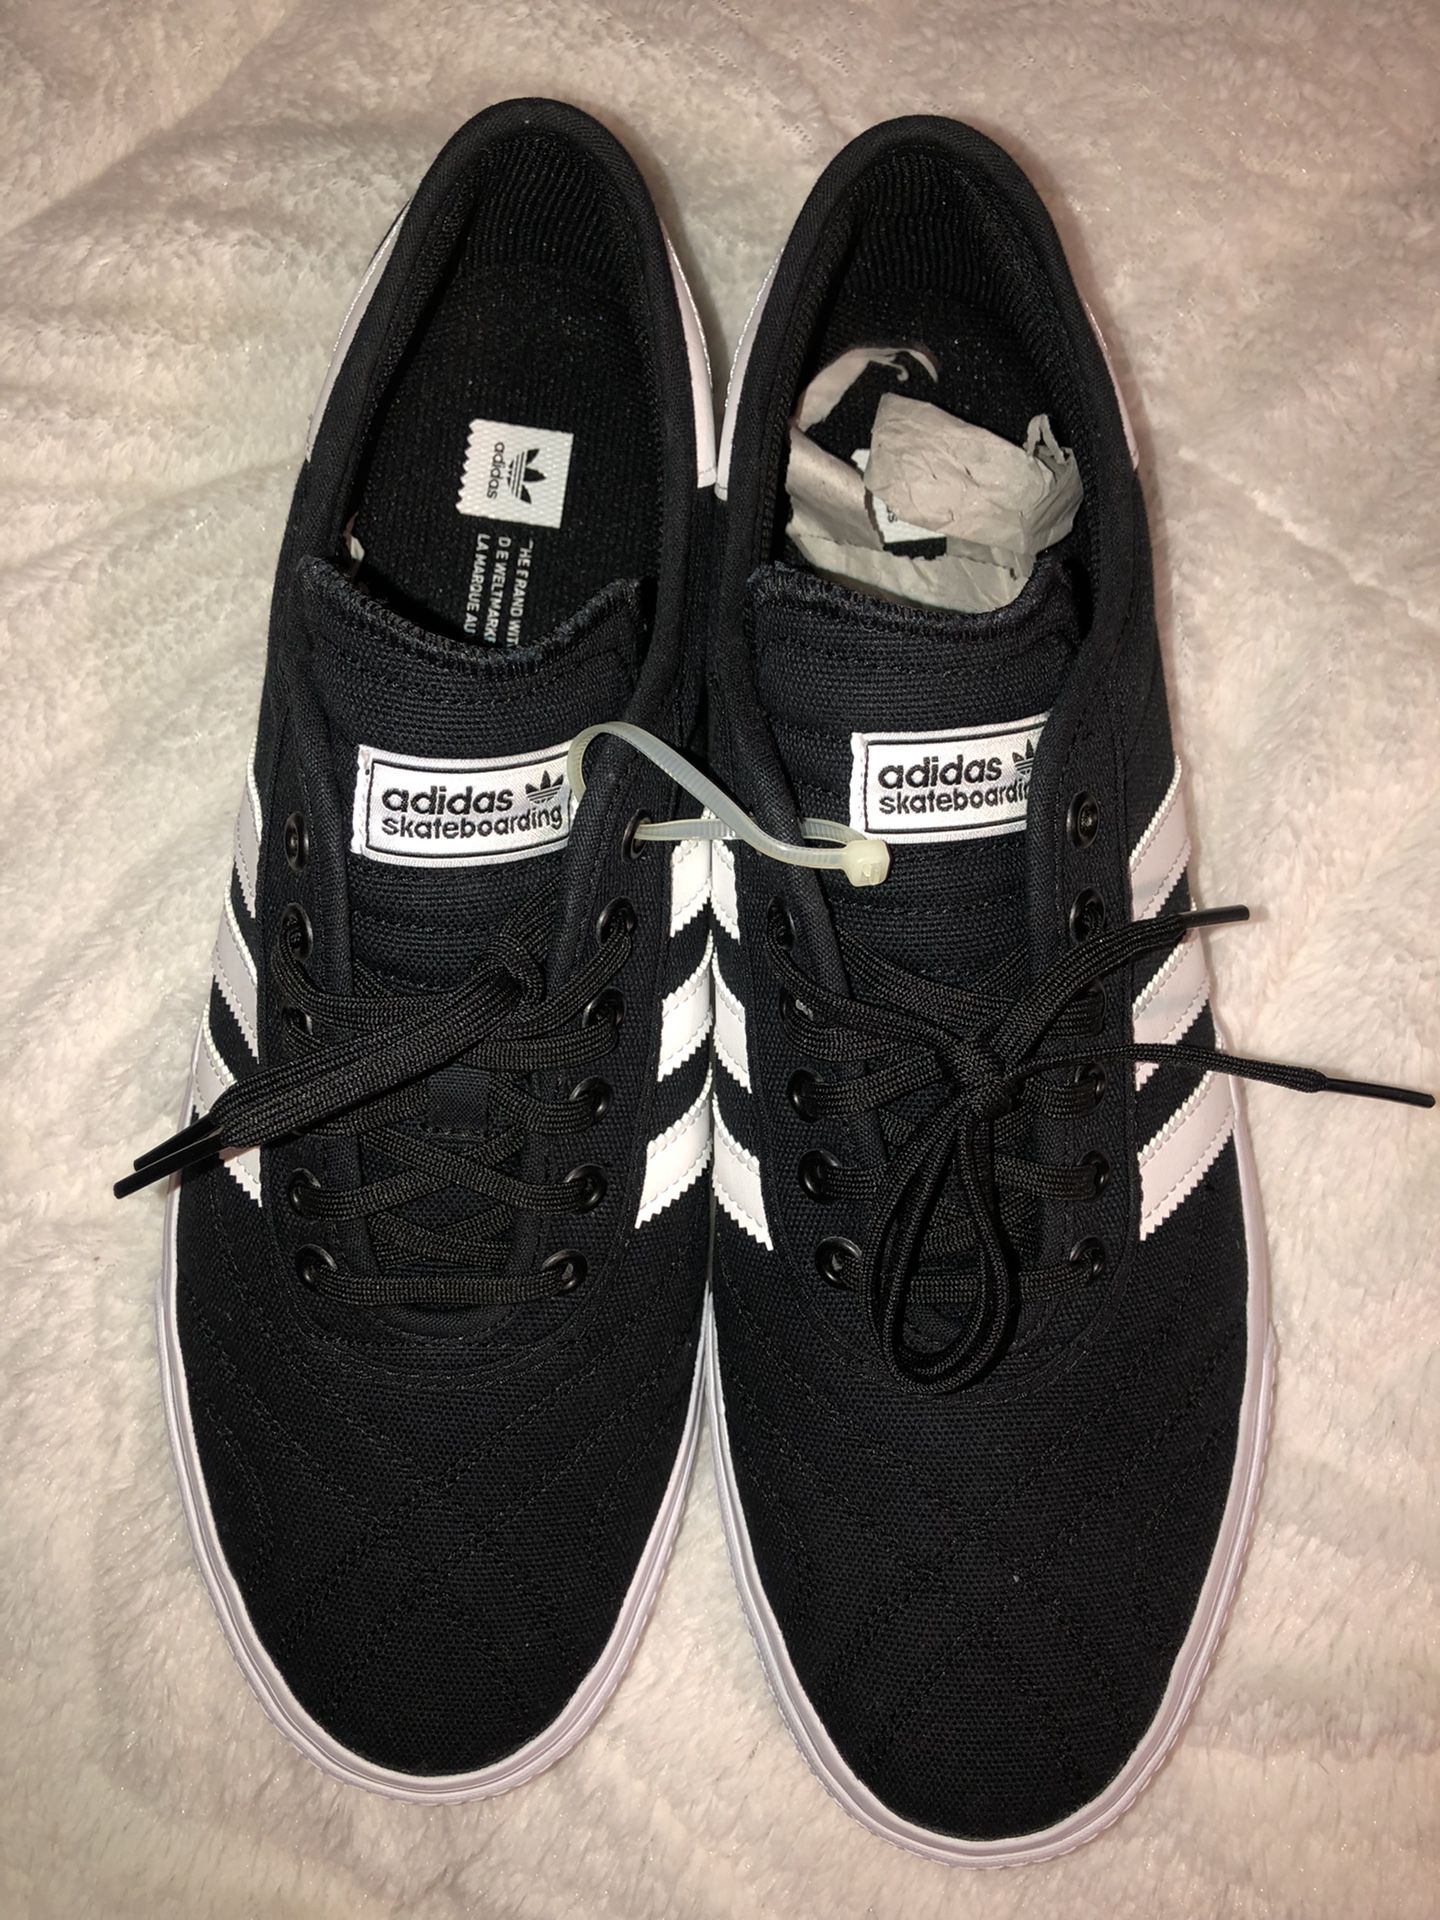 Black and White Skateboarding Shoes (Size 13) for in El Paso, - OfferUp